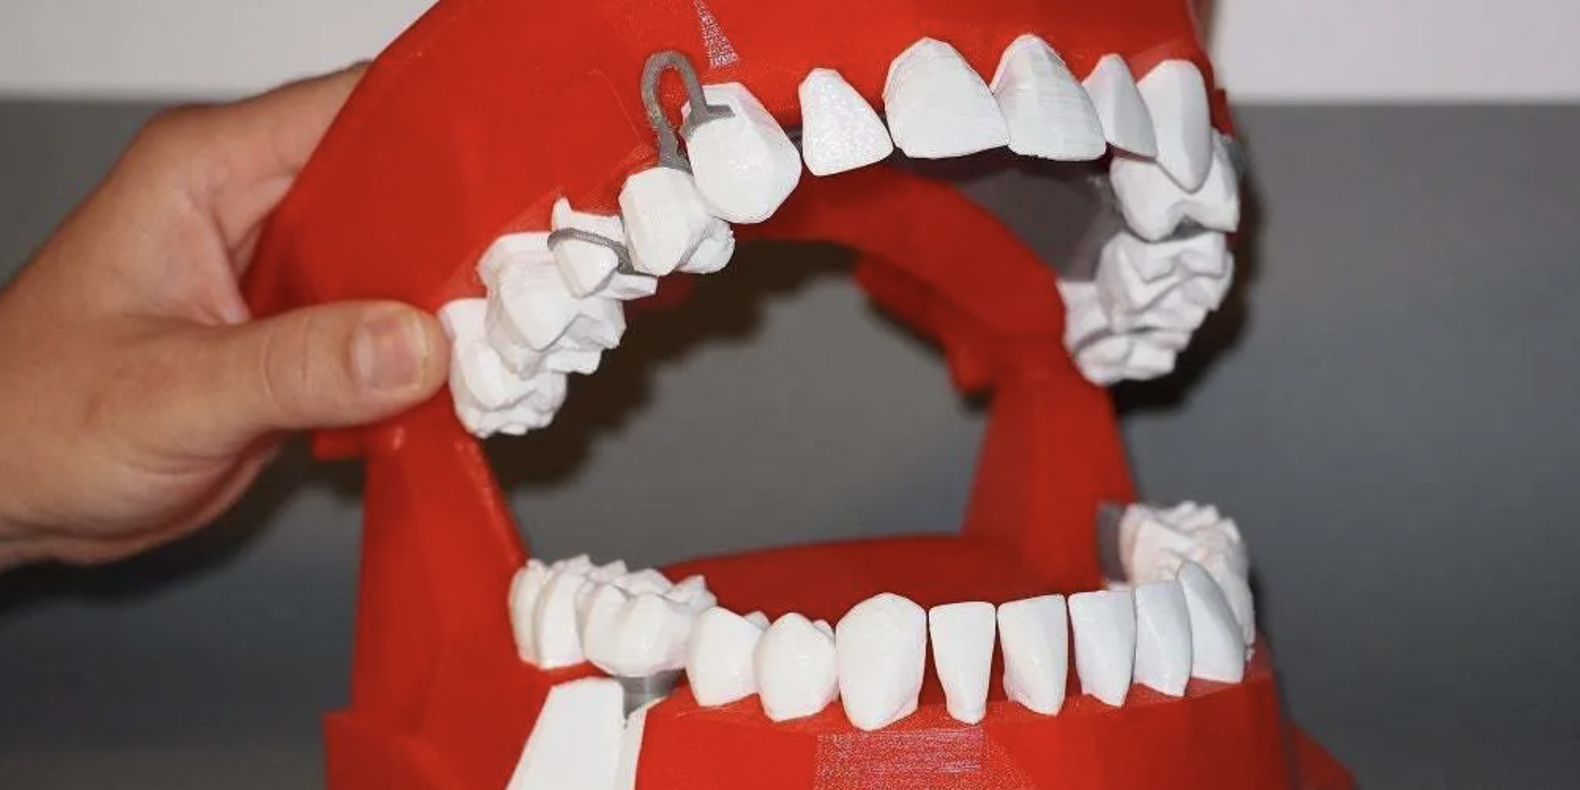 Find here a selection of the best 3D models of 3D printable Dental, Dentistry and Orthodontics files